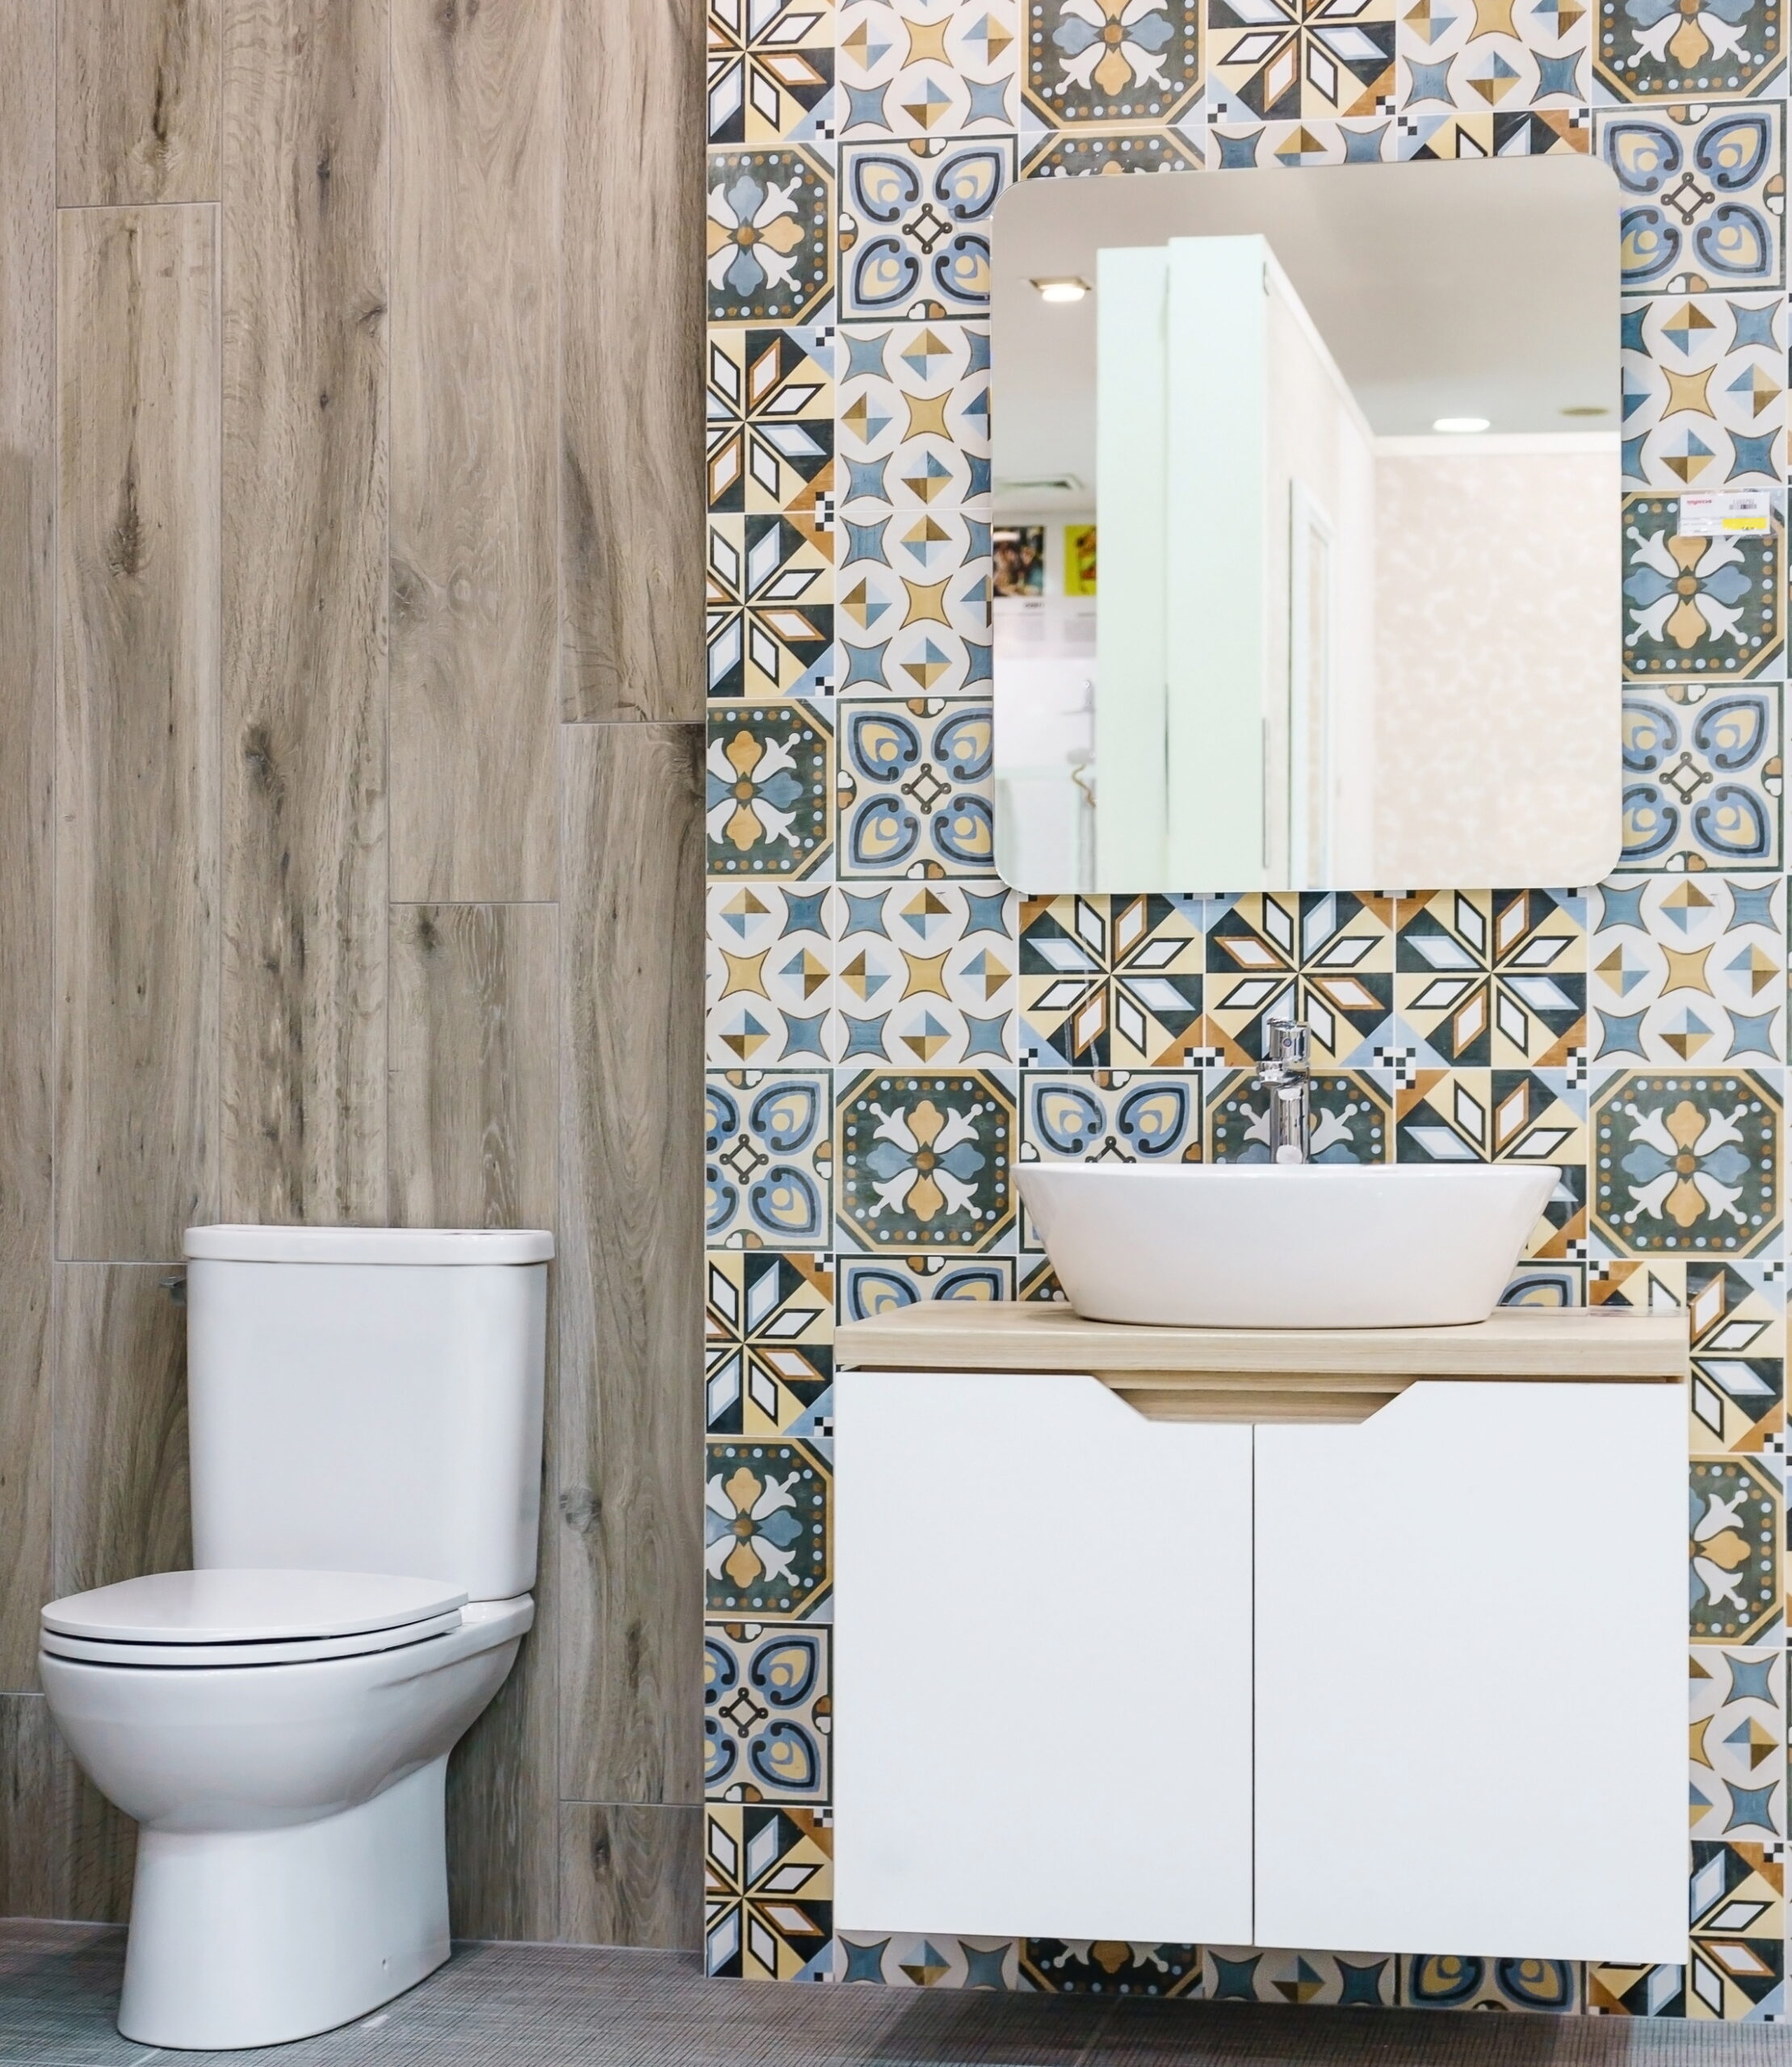 Elevate your guest bathroom with textured tiles, patterned wallpapers, or accent pieces for visual interest.